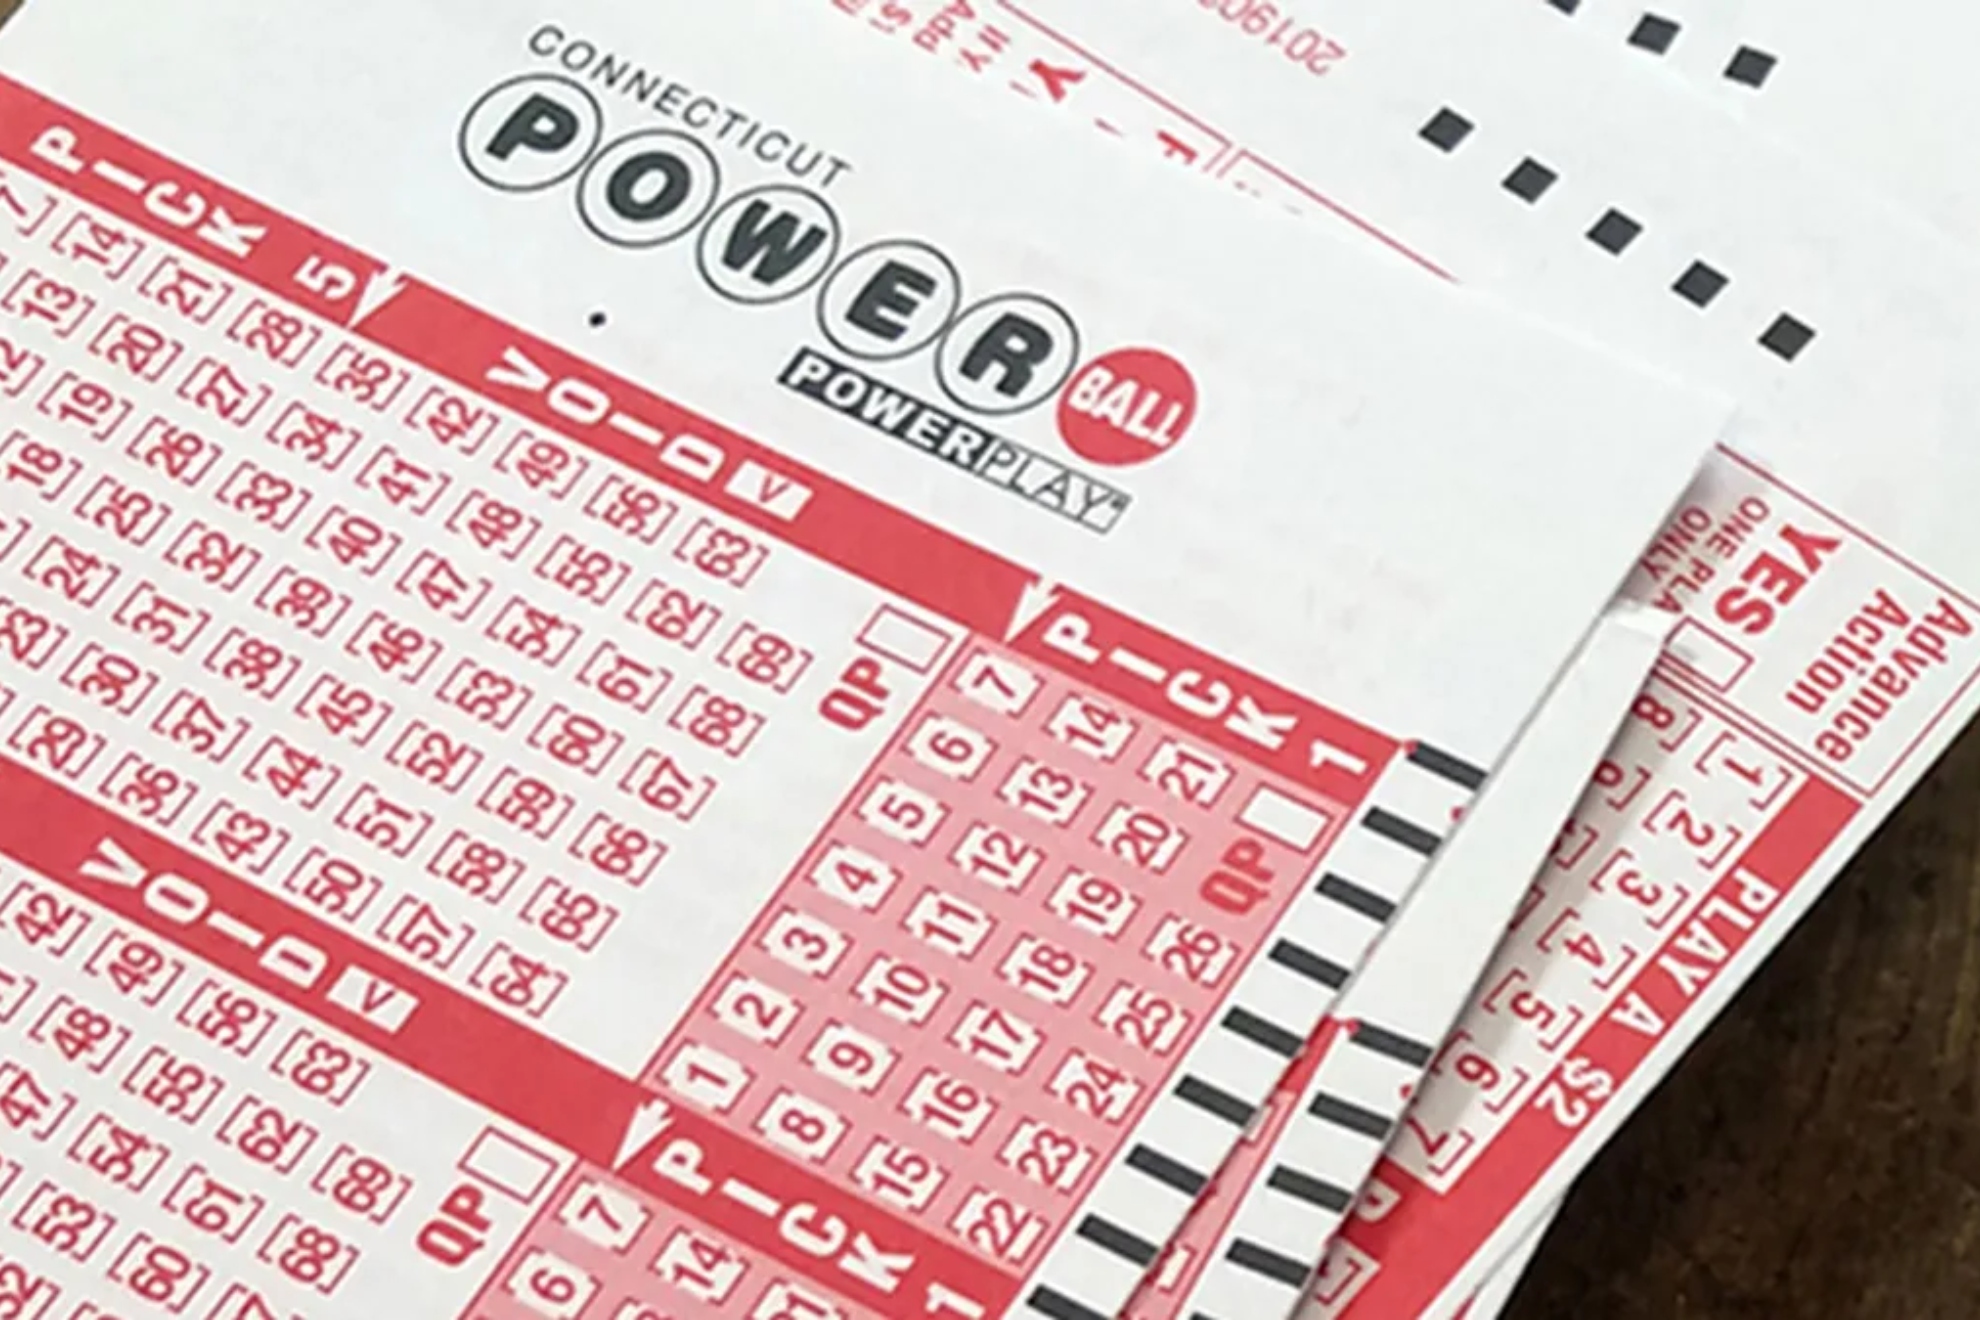 Time to check those Powerball numbers. Best of luck!